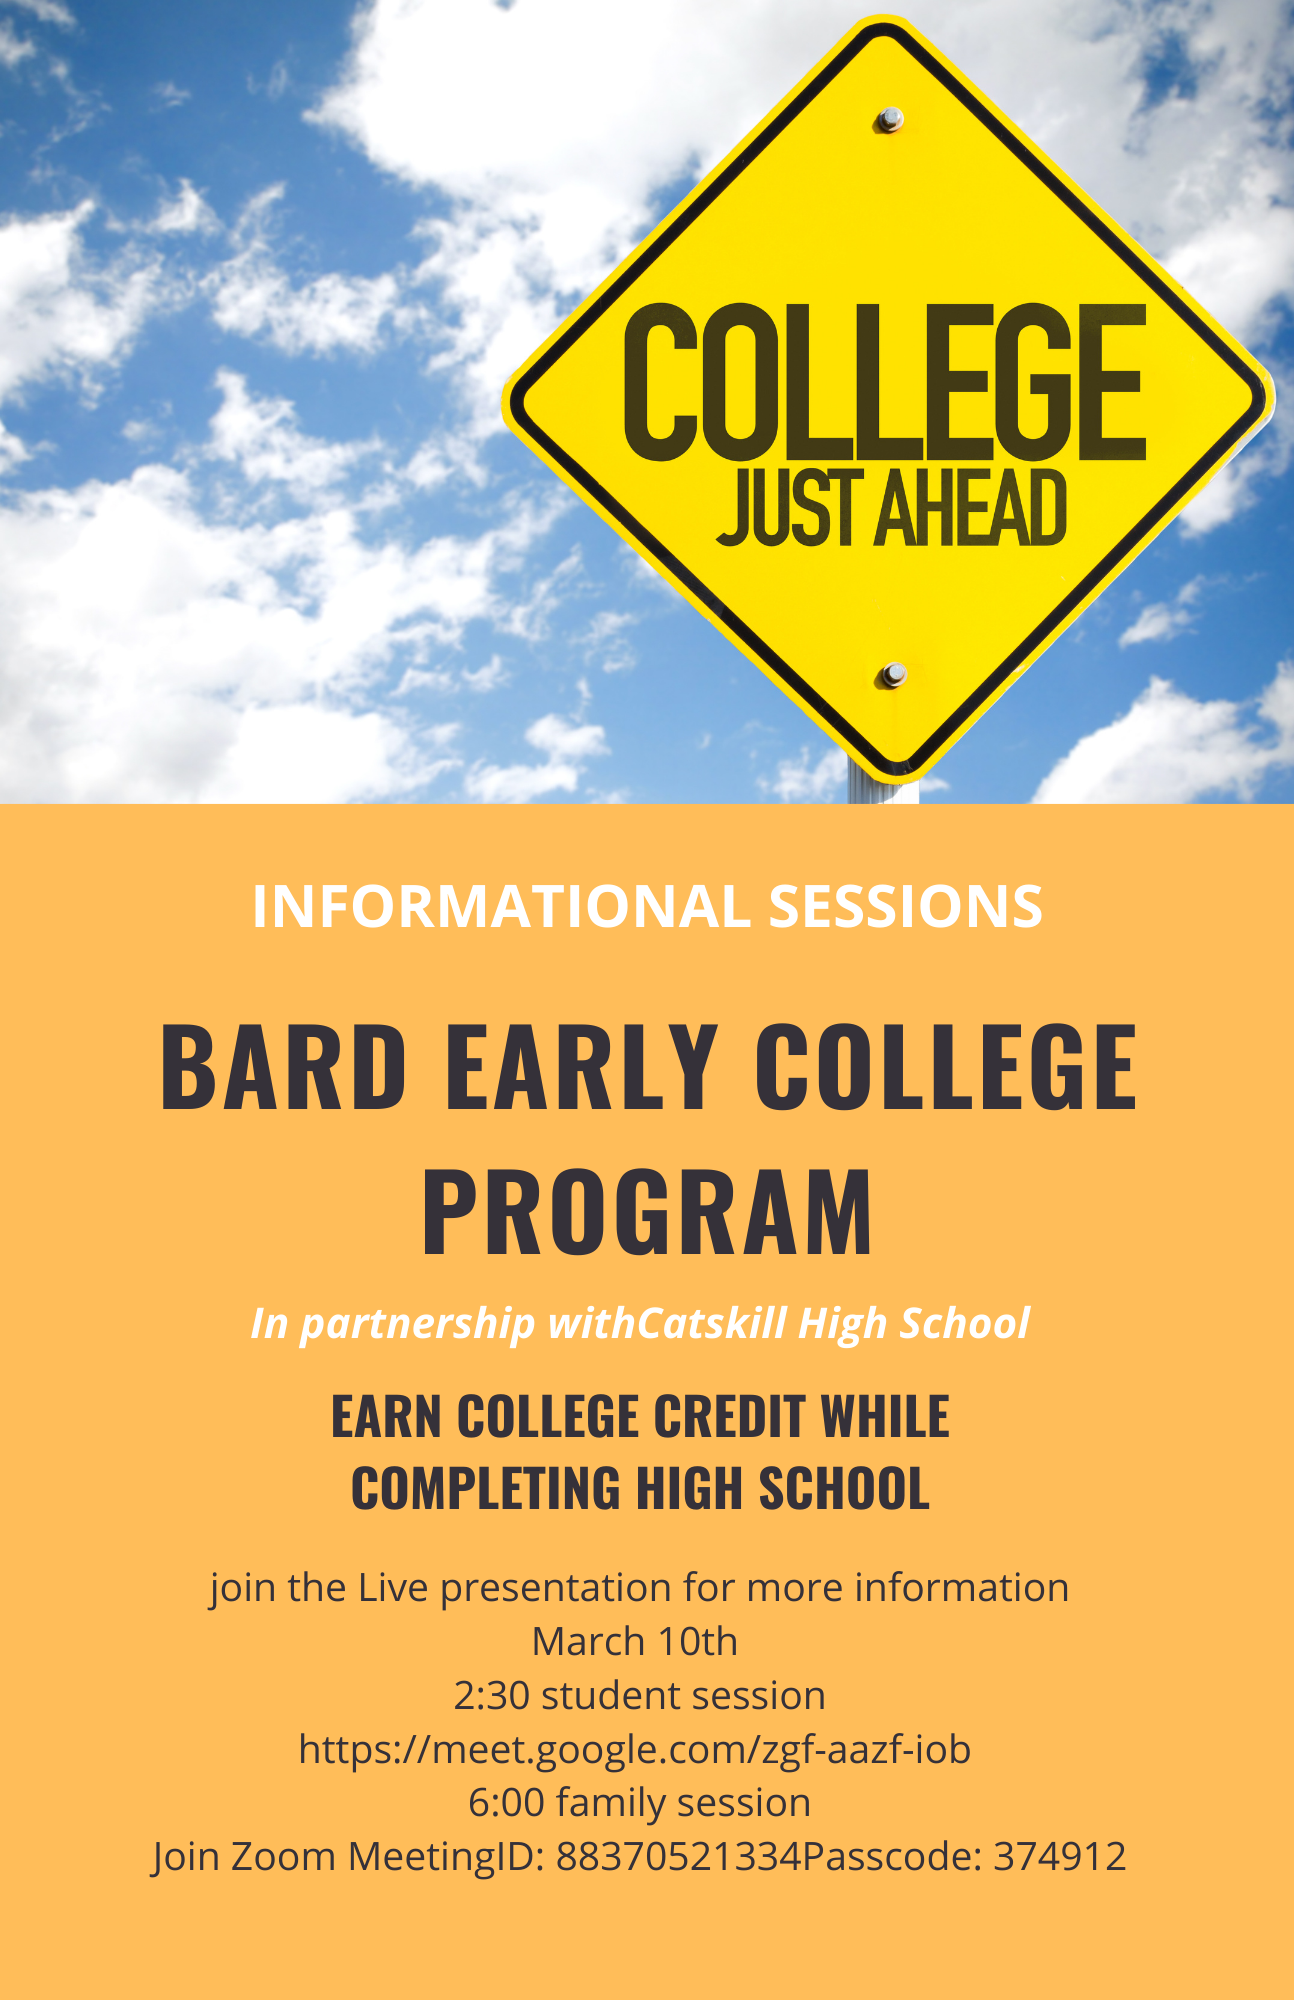 bard-early-college-student-info-session-catskill-central-school-district